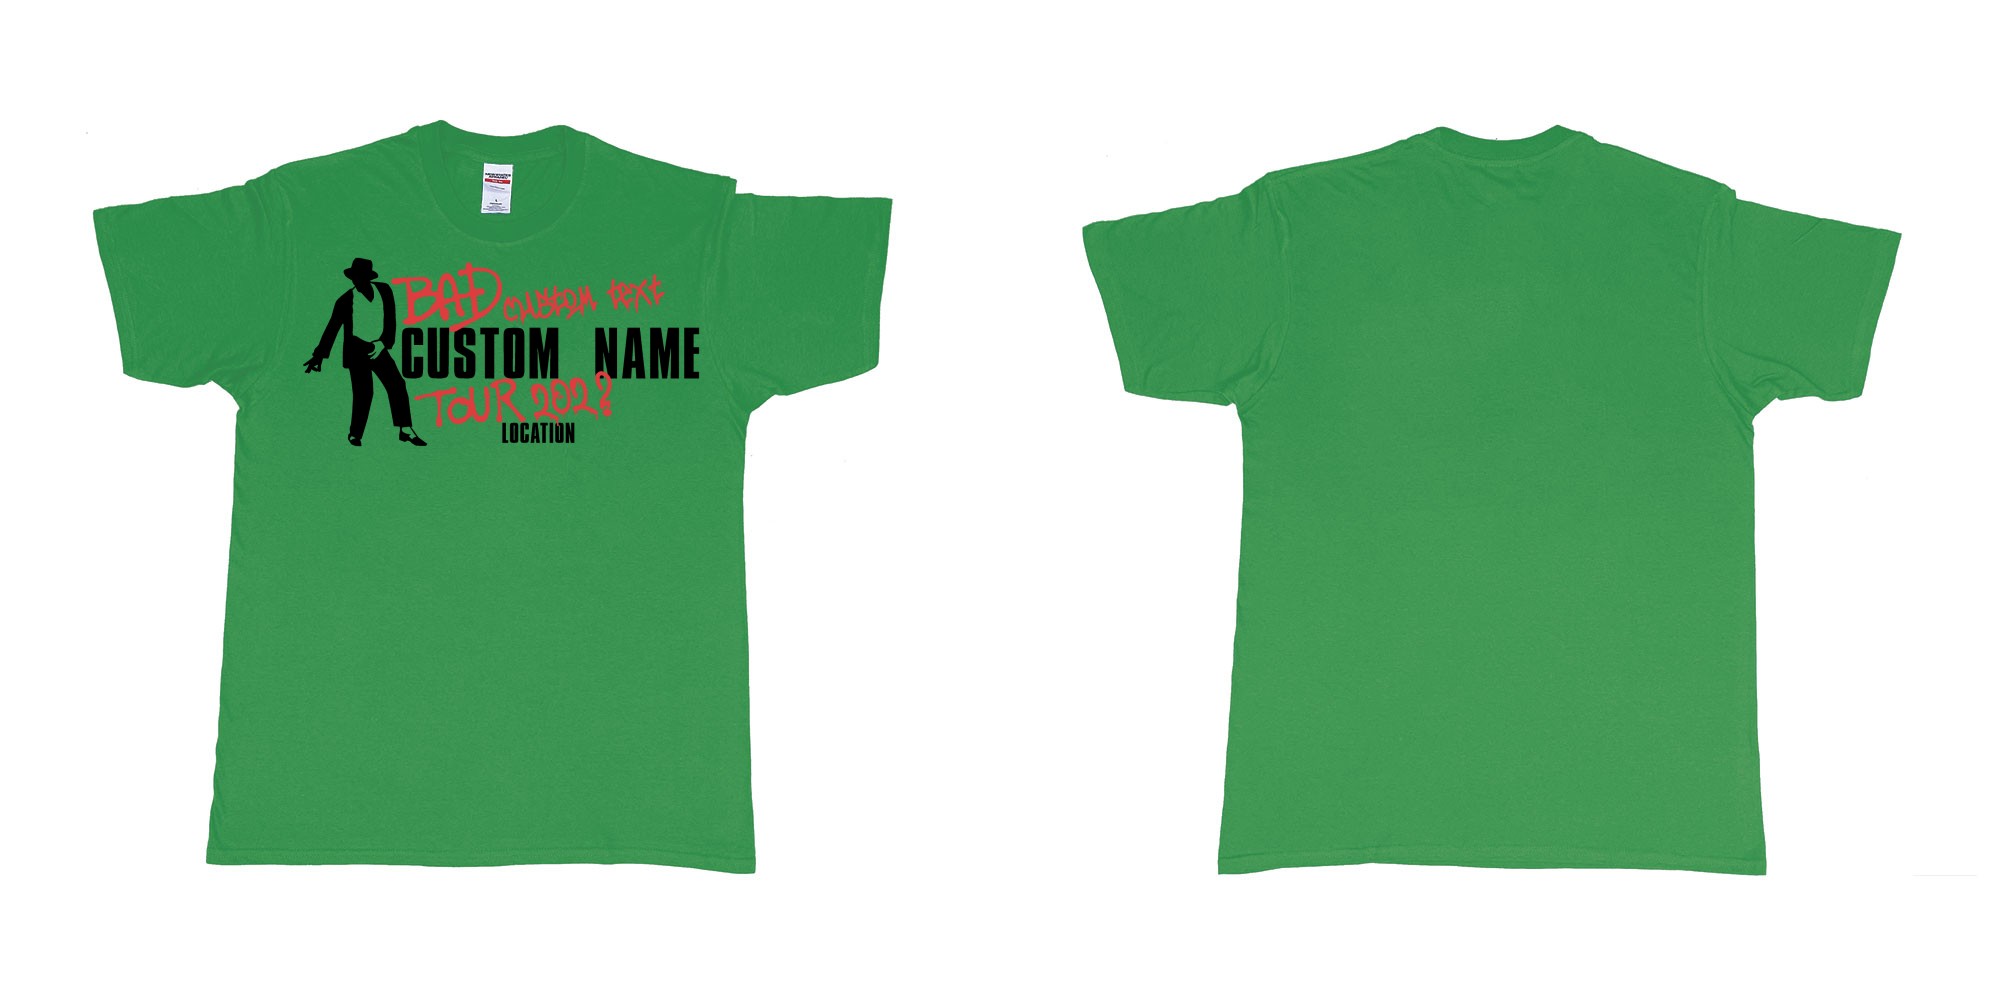 Custom tshirt design michael jackson bad tour custom name year location in fabric color irish-green choice your own text made in Bali by The Pirate Way